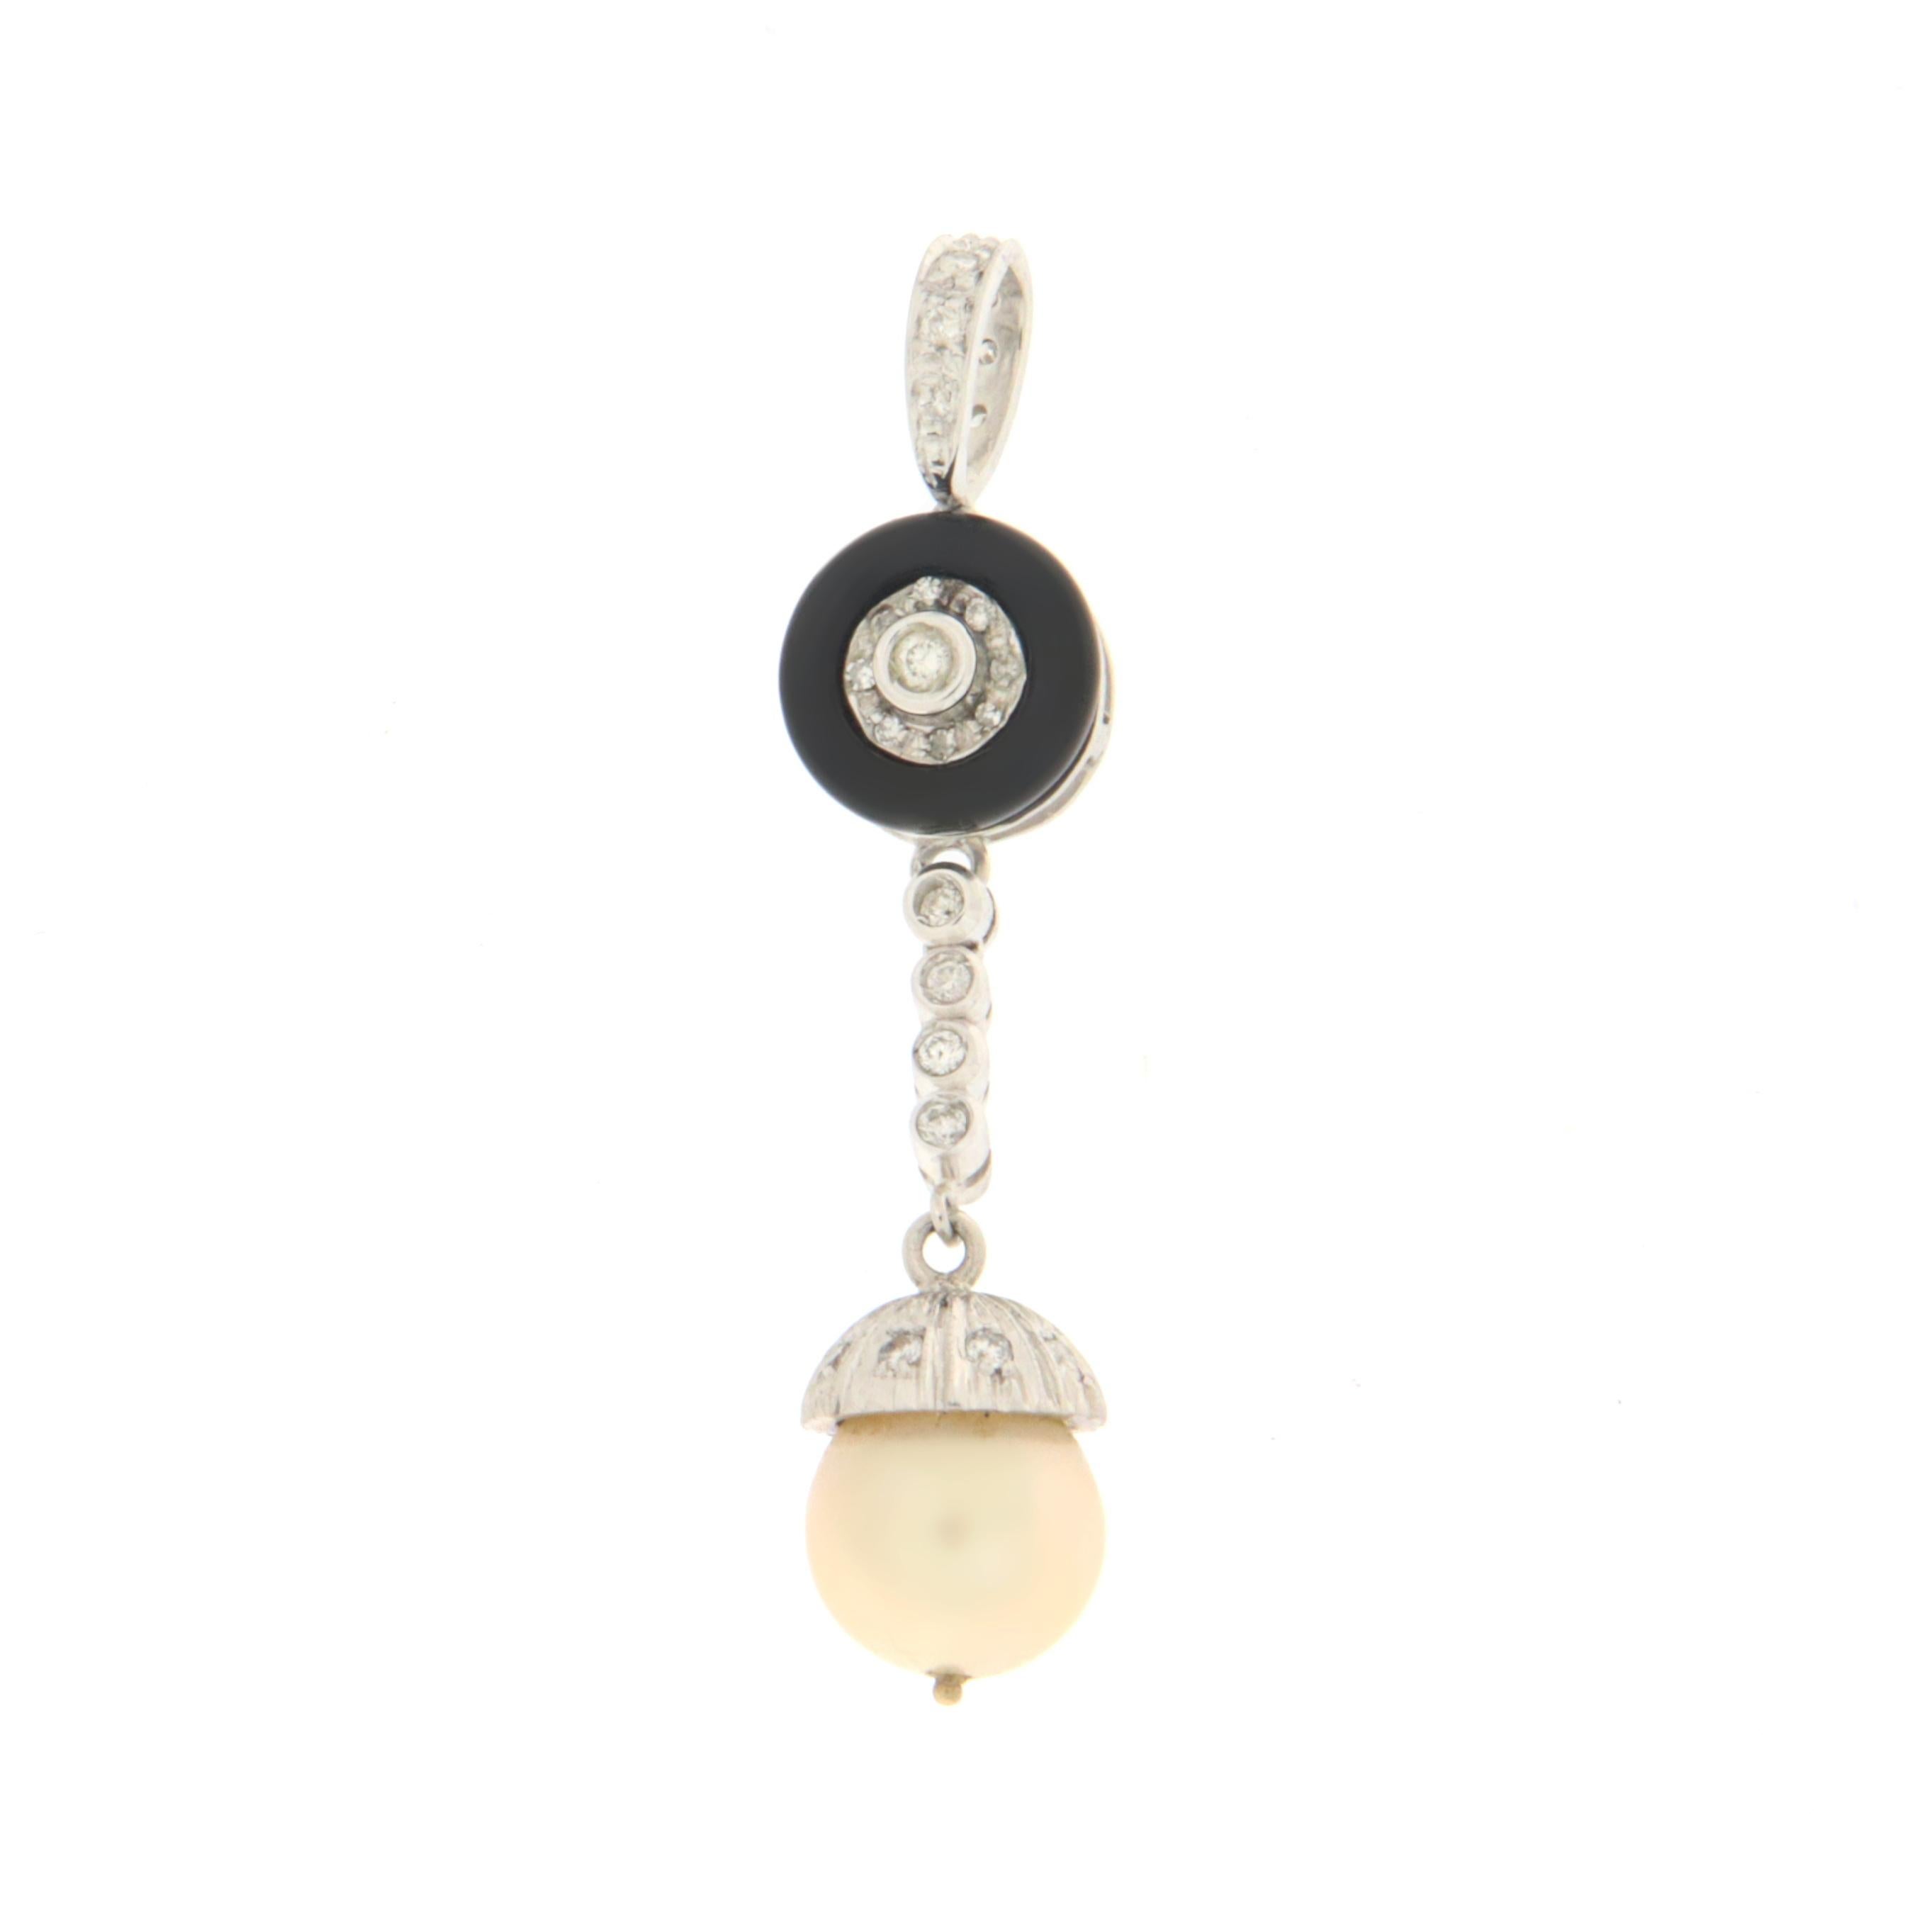 Beautiful 18 karat white gold pendant necklace.Handmade by our craftsmen assembled with onyx,diamonds and south sea pearl

Diamonds weight 0.10 karat
Pendant total weight 5.10 grams
Chain is not included in the price